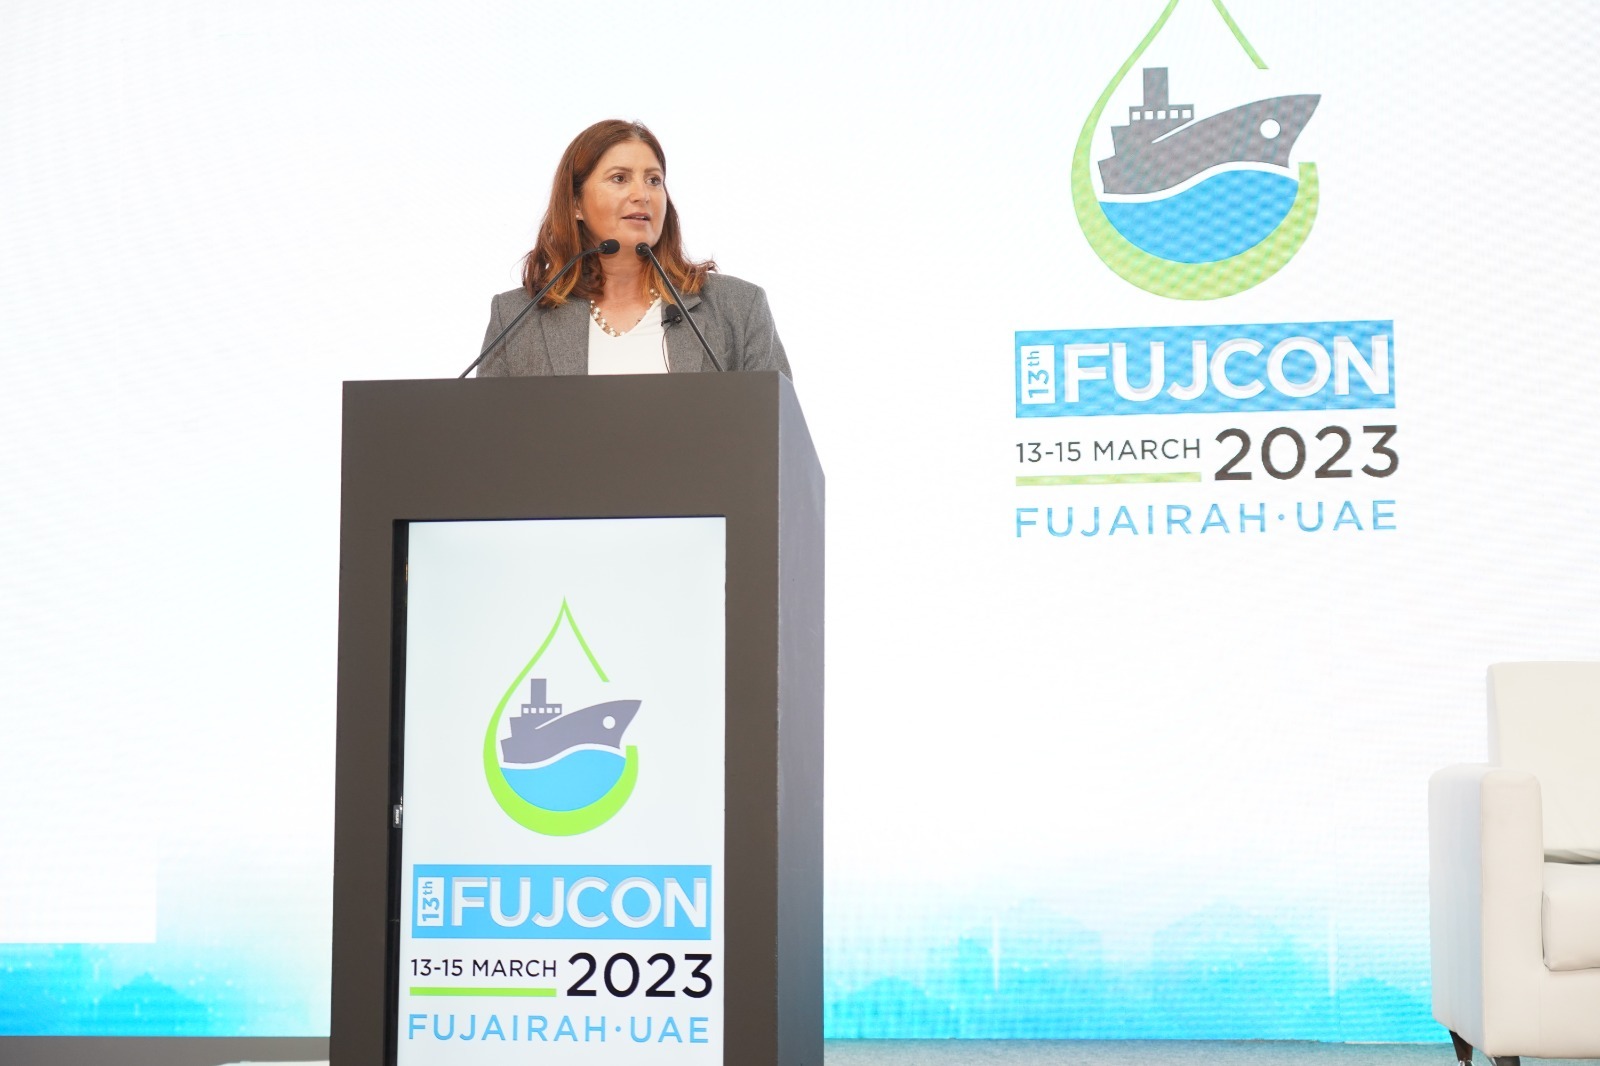 Fichte & Co. initiates dialogue on emerging legal challenges in maritime and its solutions at FUJCON 2023